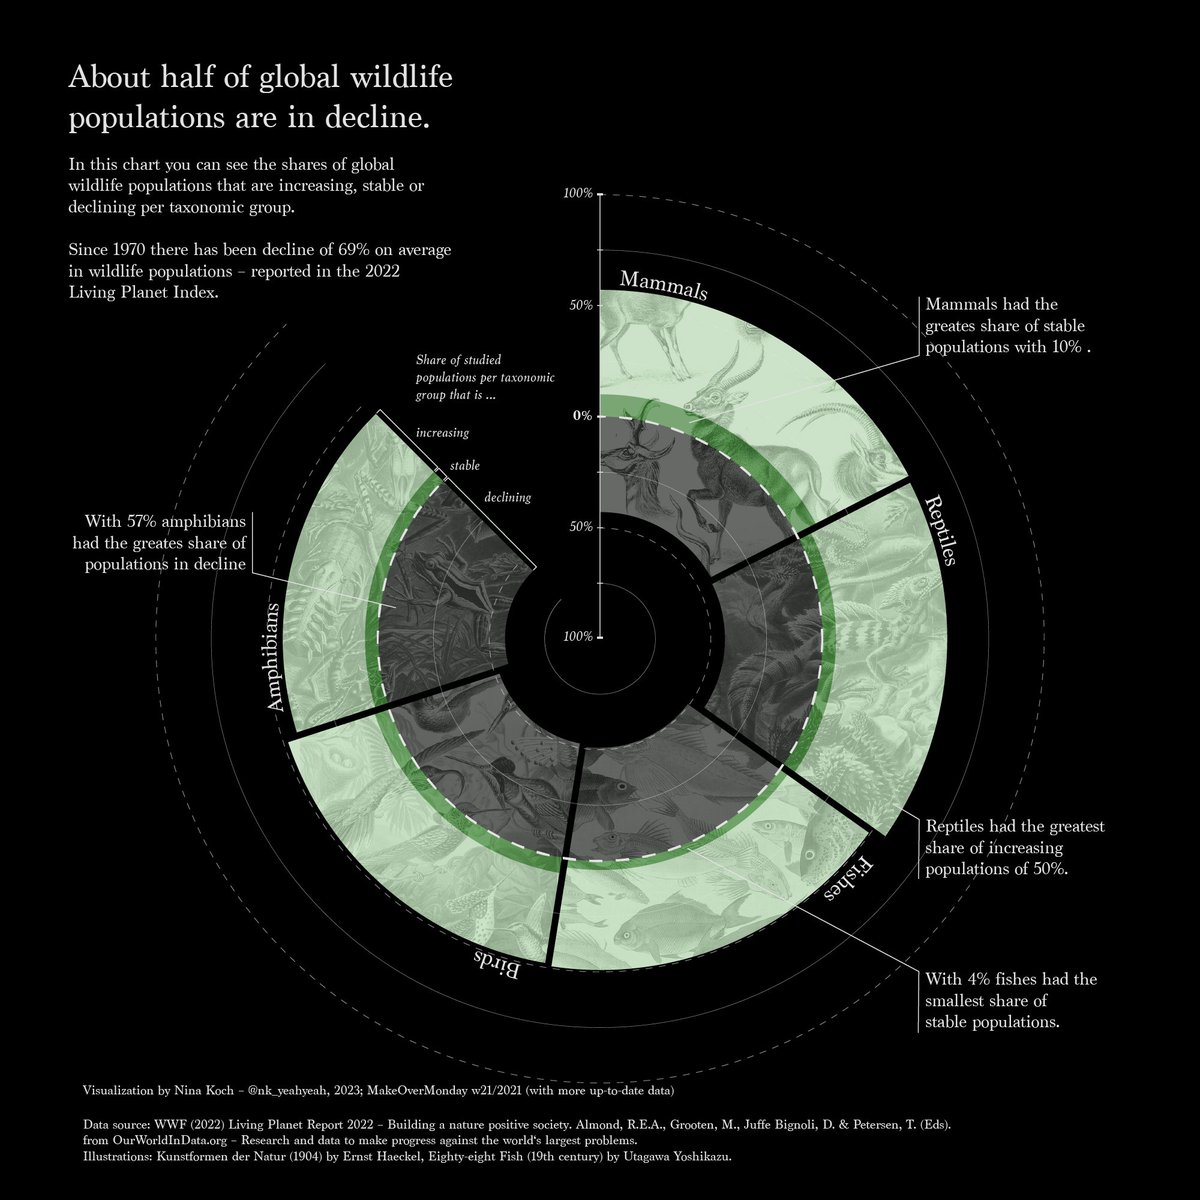 #makeovermonday 2021/w21 – with more recent data from 2022: The shares of #wildlife populations per taxonomy that are increasing, declining or stable. #wwf #livingplanetreport #dataviz #DataVisualization